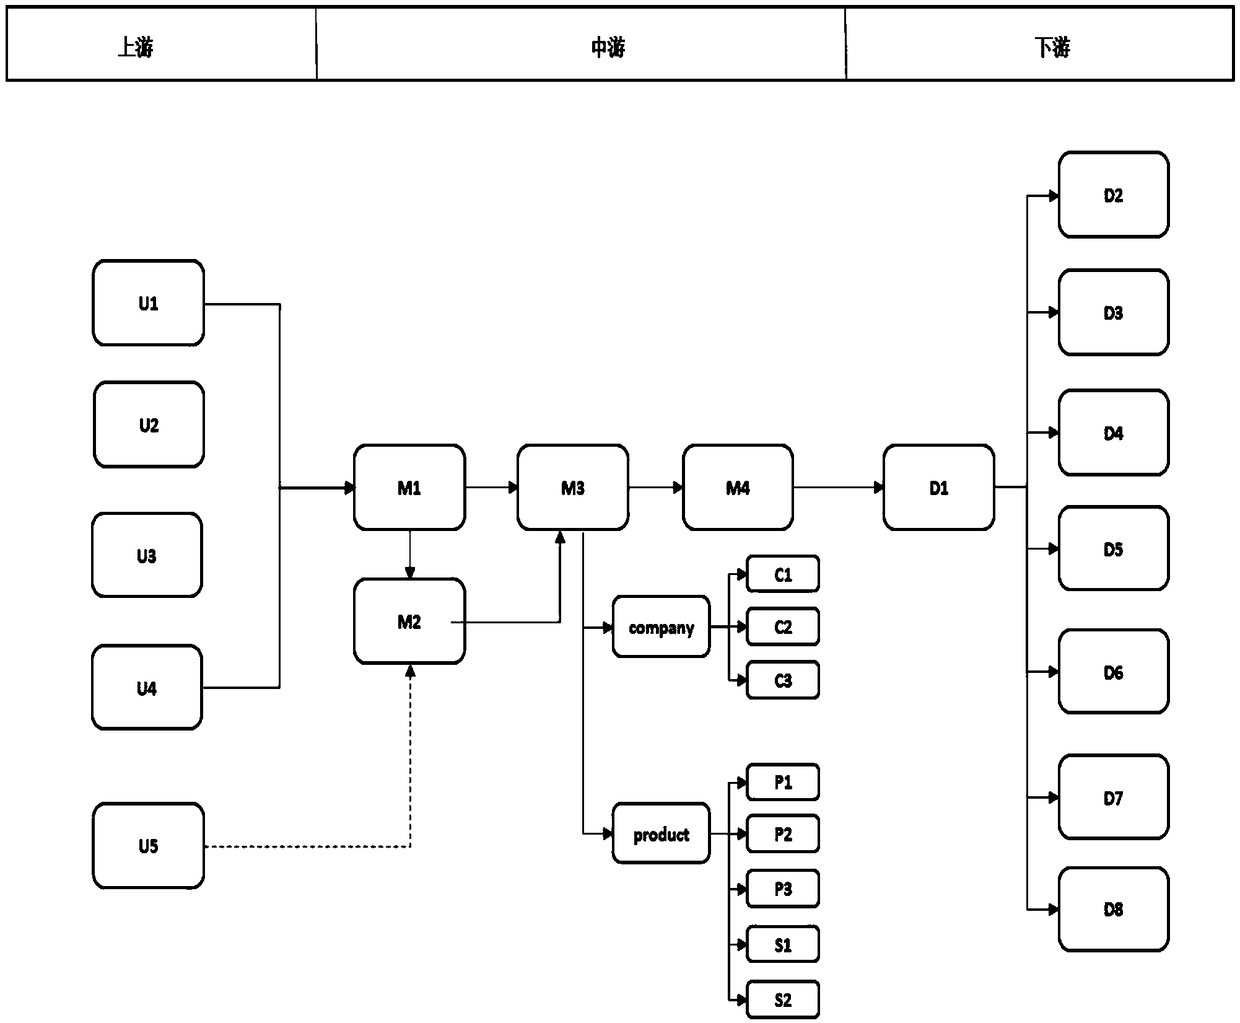 A method for constructing industrial knowledge map based on industrial chain